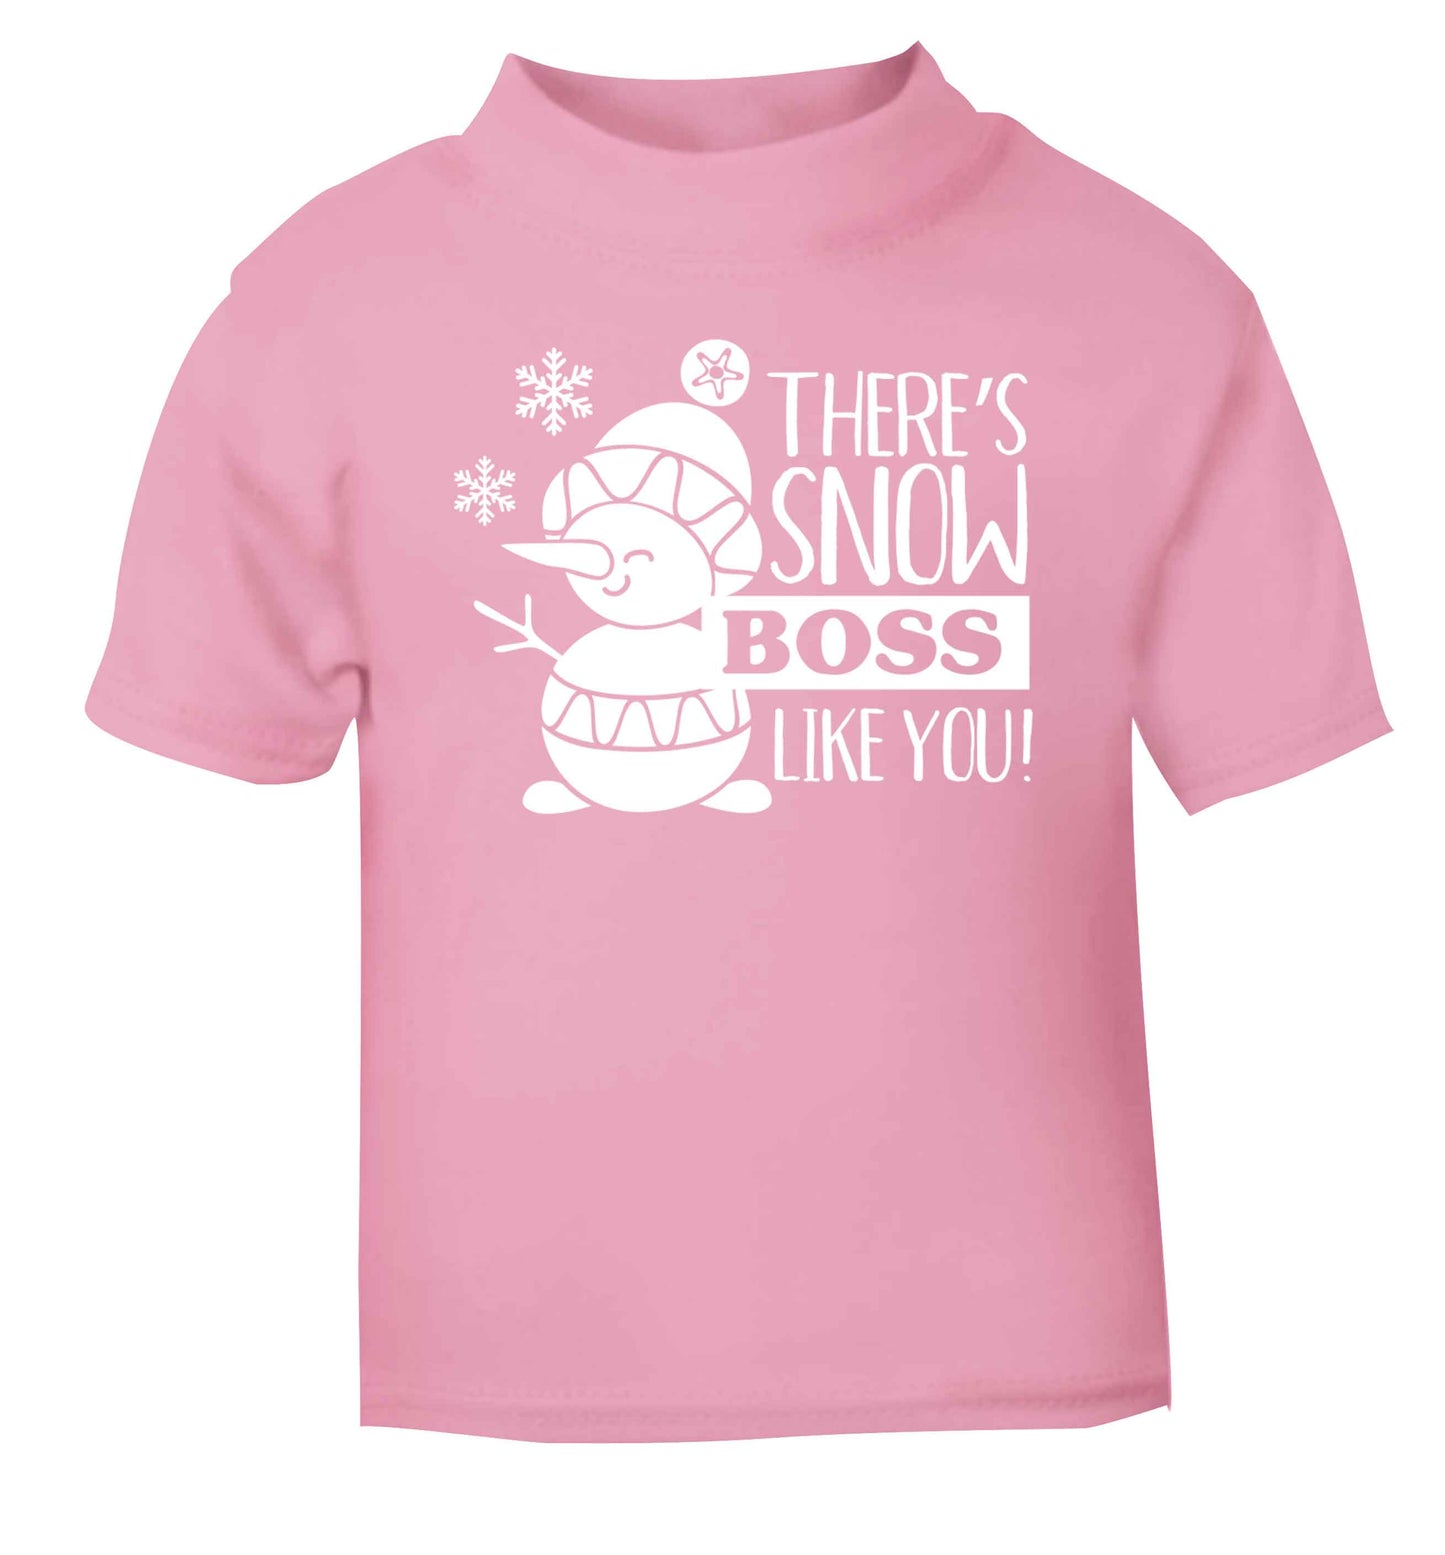 There's snow boss like you light pink baby toddler Tshirt 2 Years